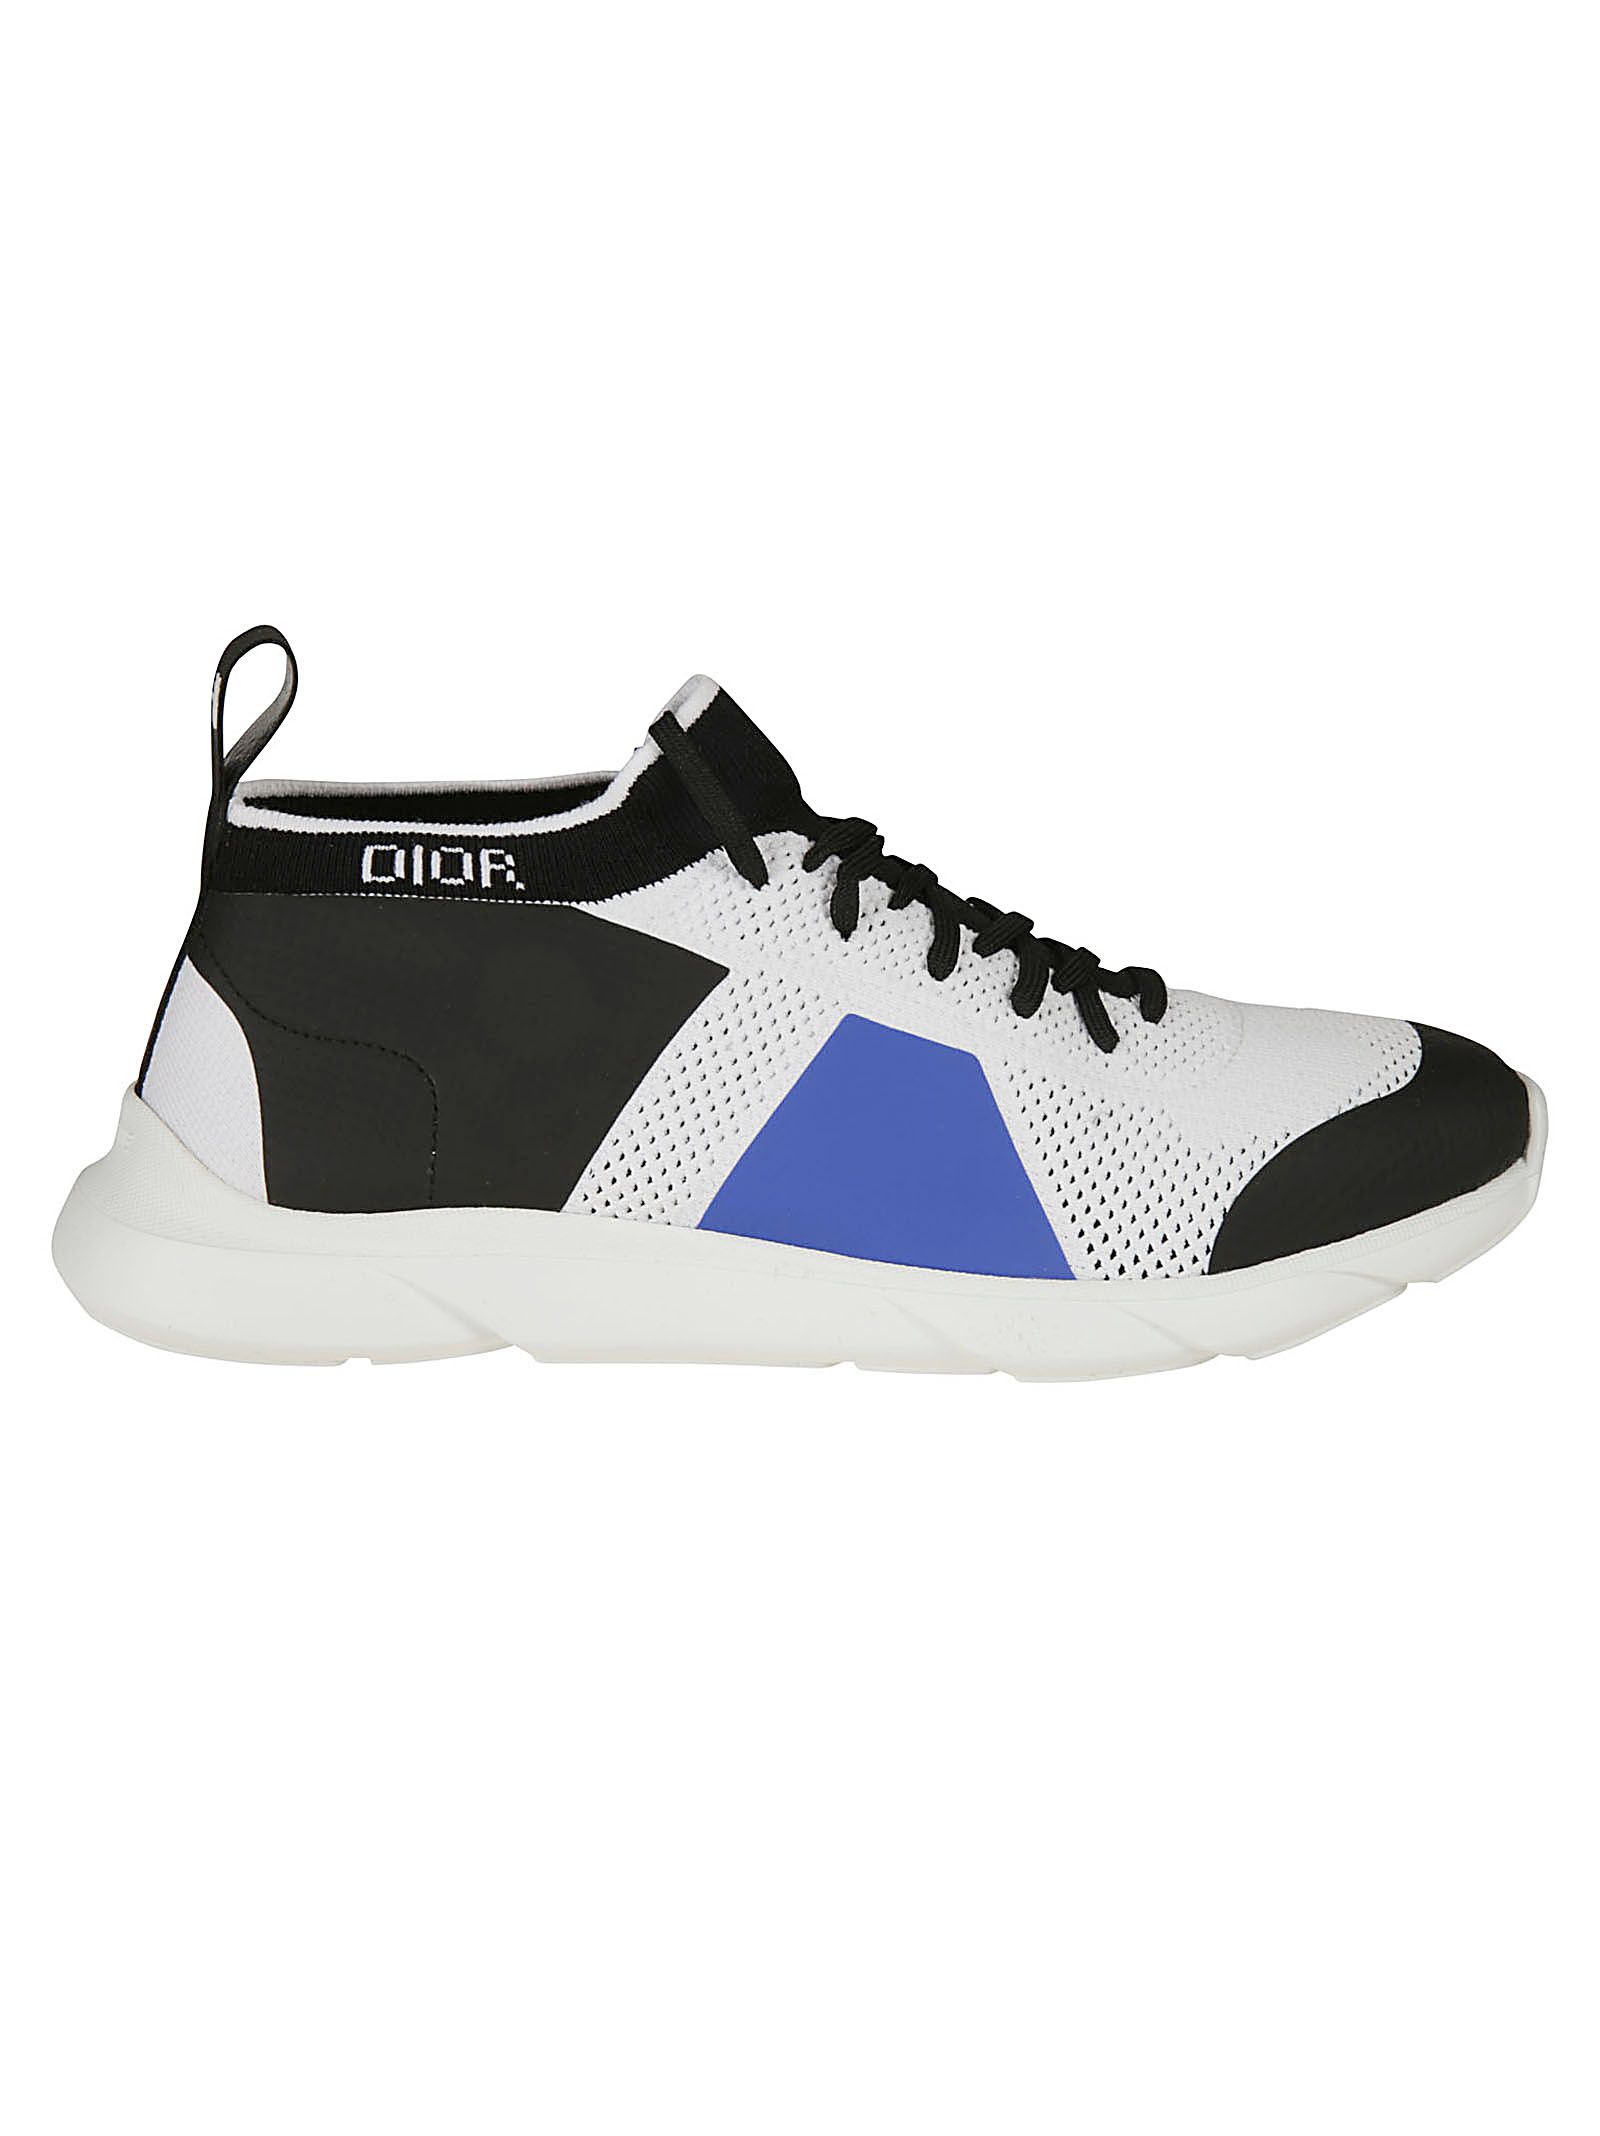 Christian Dior Christian Dior Perforated Sneakers - Multicolor ...